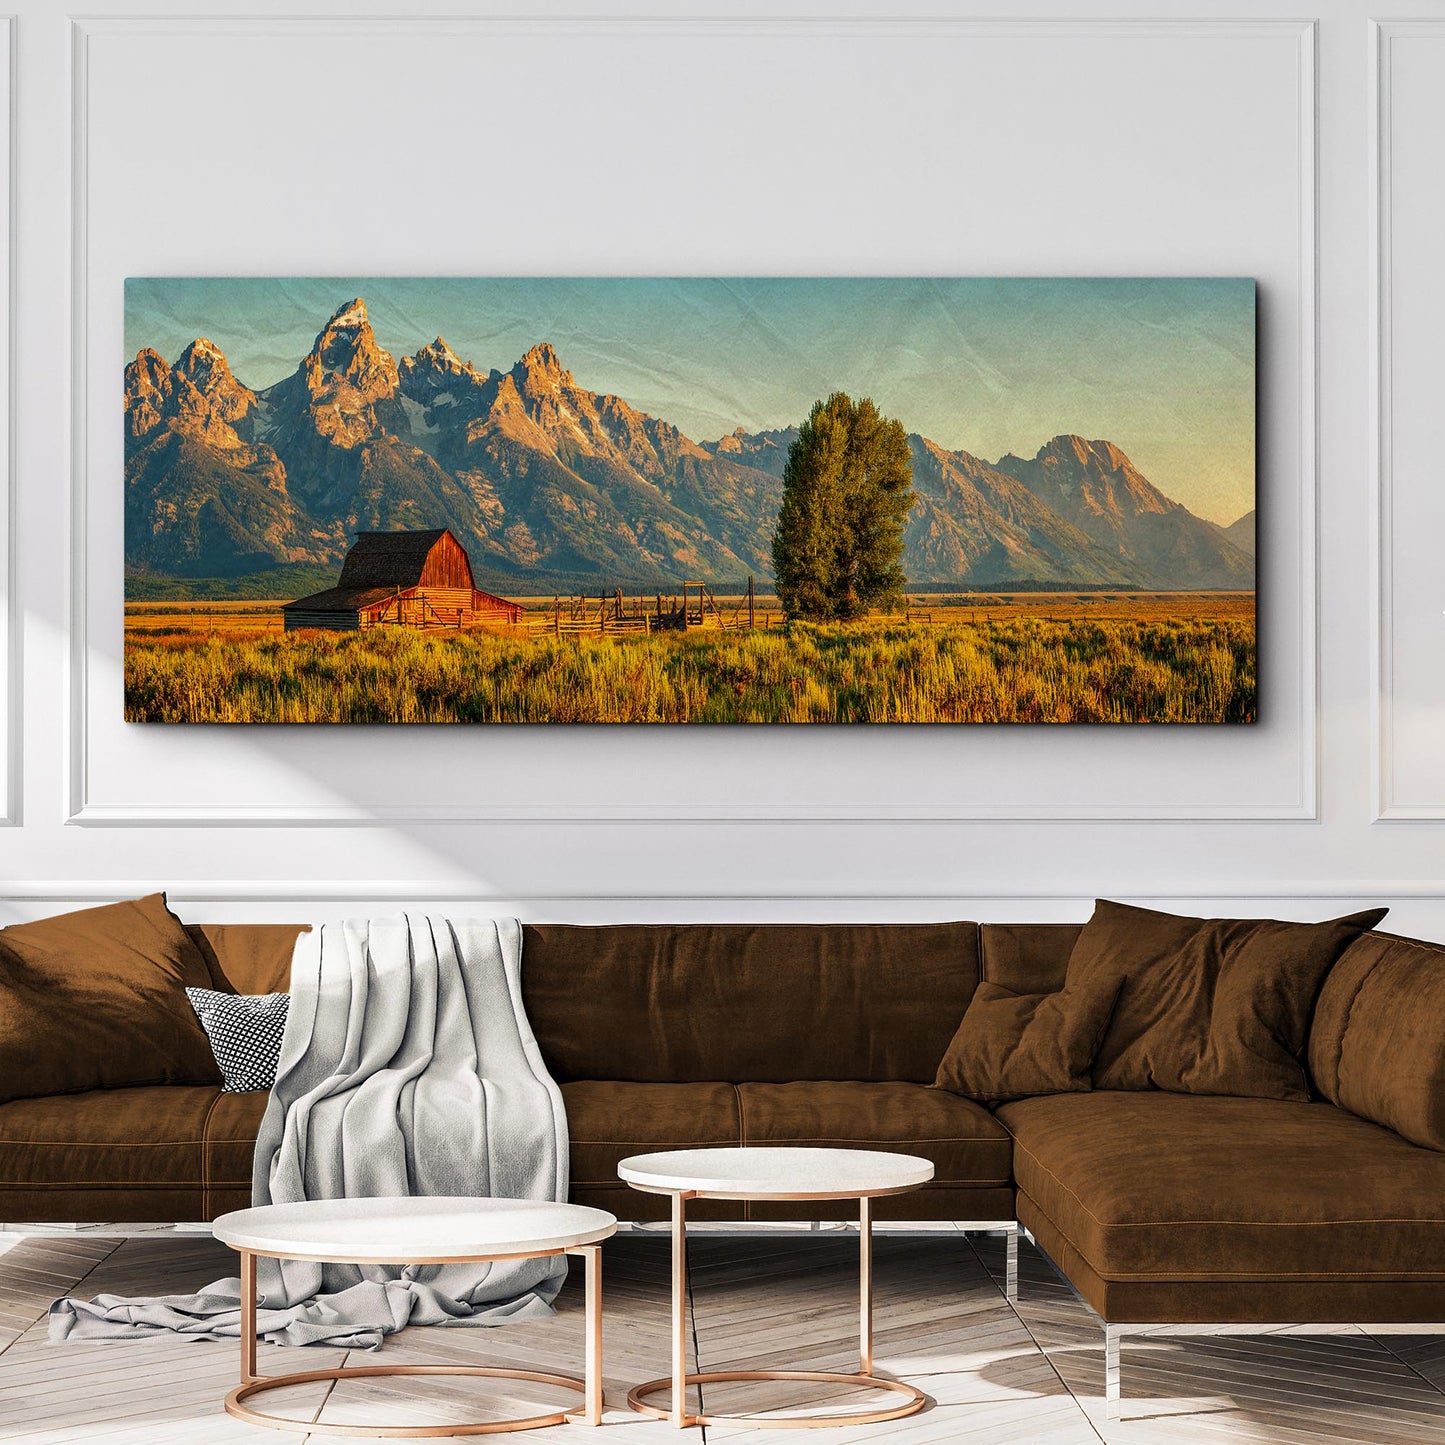 The Wild Frontier Of Grand Teton National Park Canvas Wall Art Style 2 - Image by Tailored Canvases